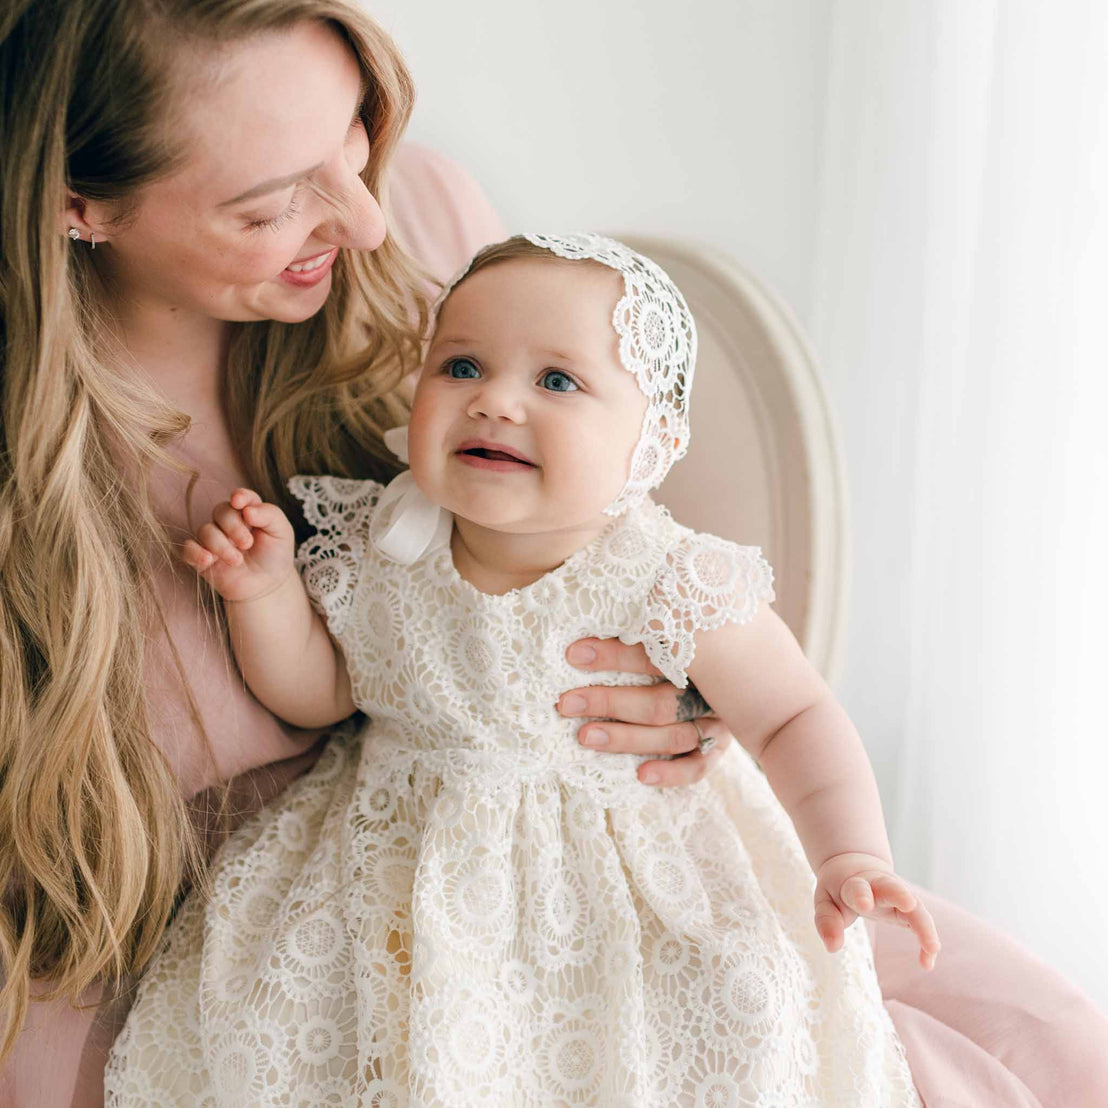 A woman with long blonde hair smiles and holds a baby dressed in a delicate white lace Poppy Christening Gown & Bonnet. The baby has blue eyes and looks up with a curious expression. The background is softly lit, creating a warm, intimate scene.